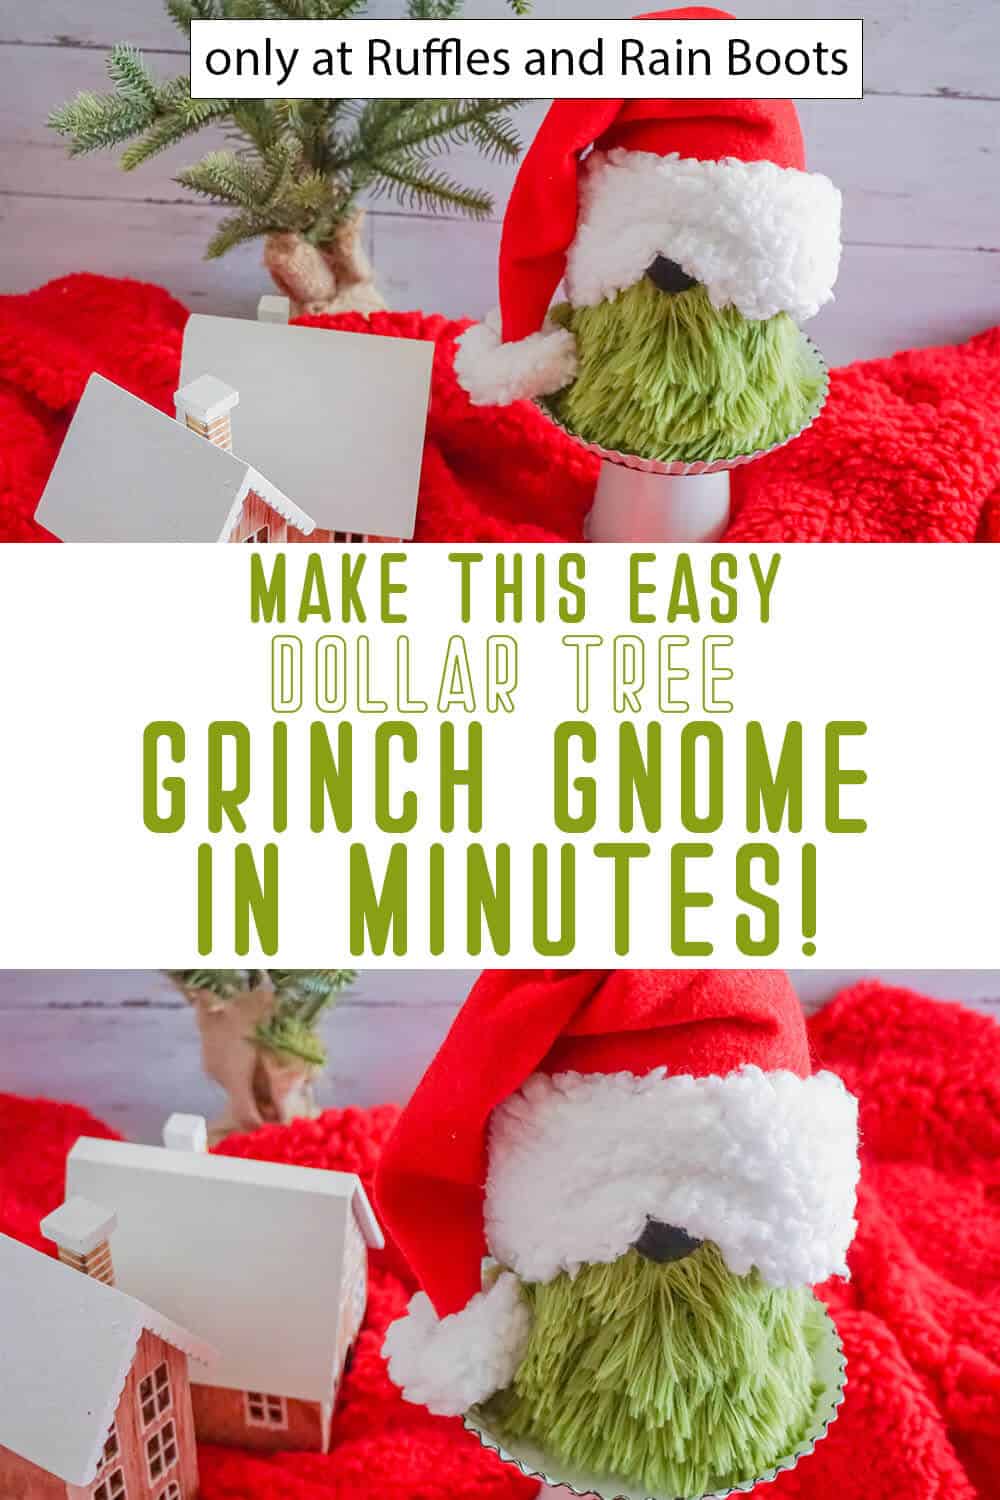 photo collage of dollar tree gnome diy for Christmas with text which reads make this easy dollar tree grinch gnome in minutes